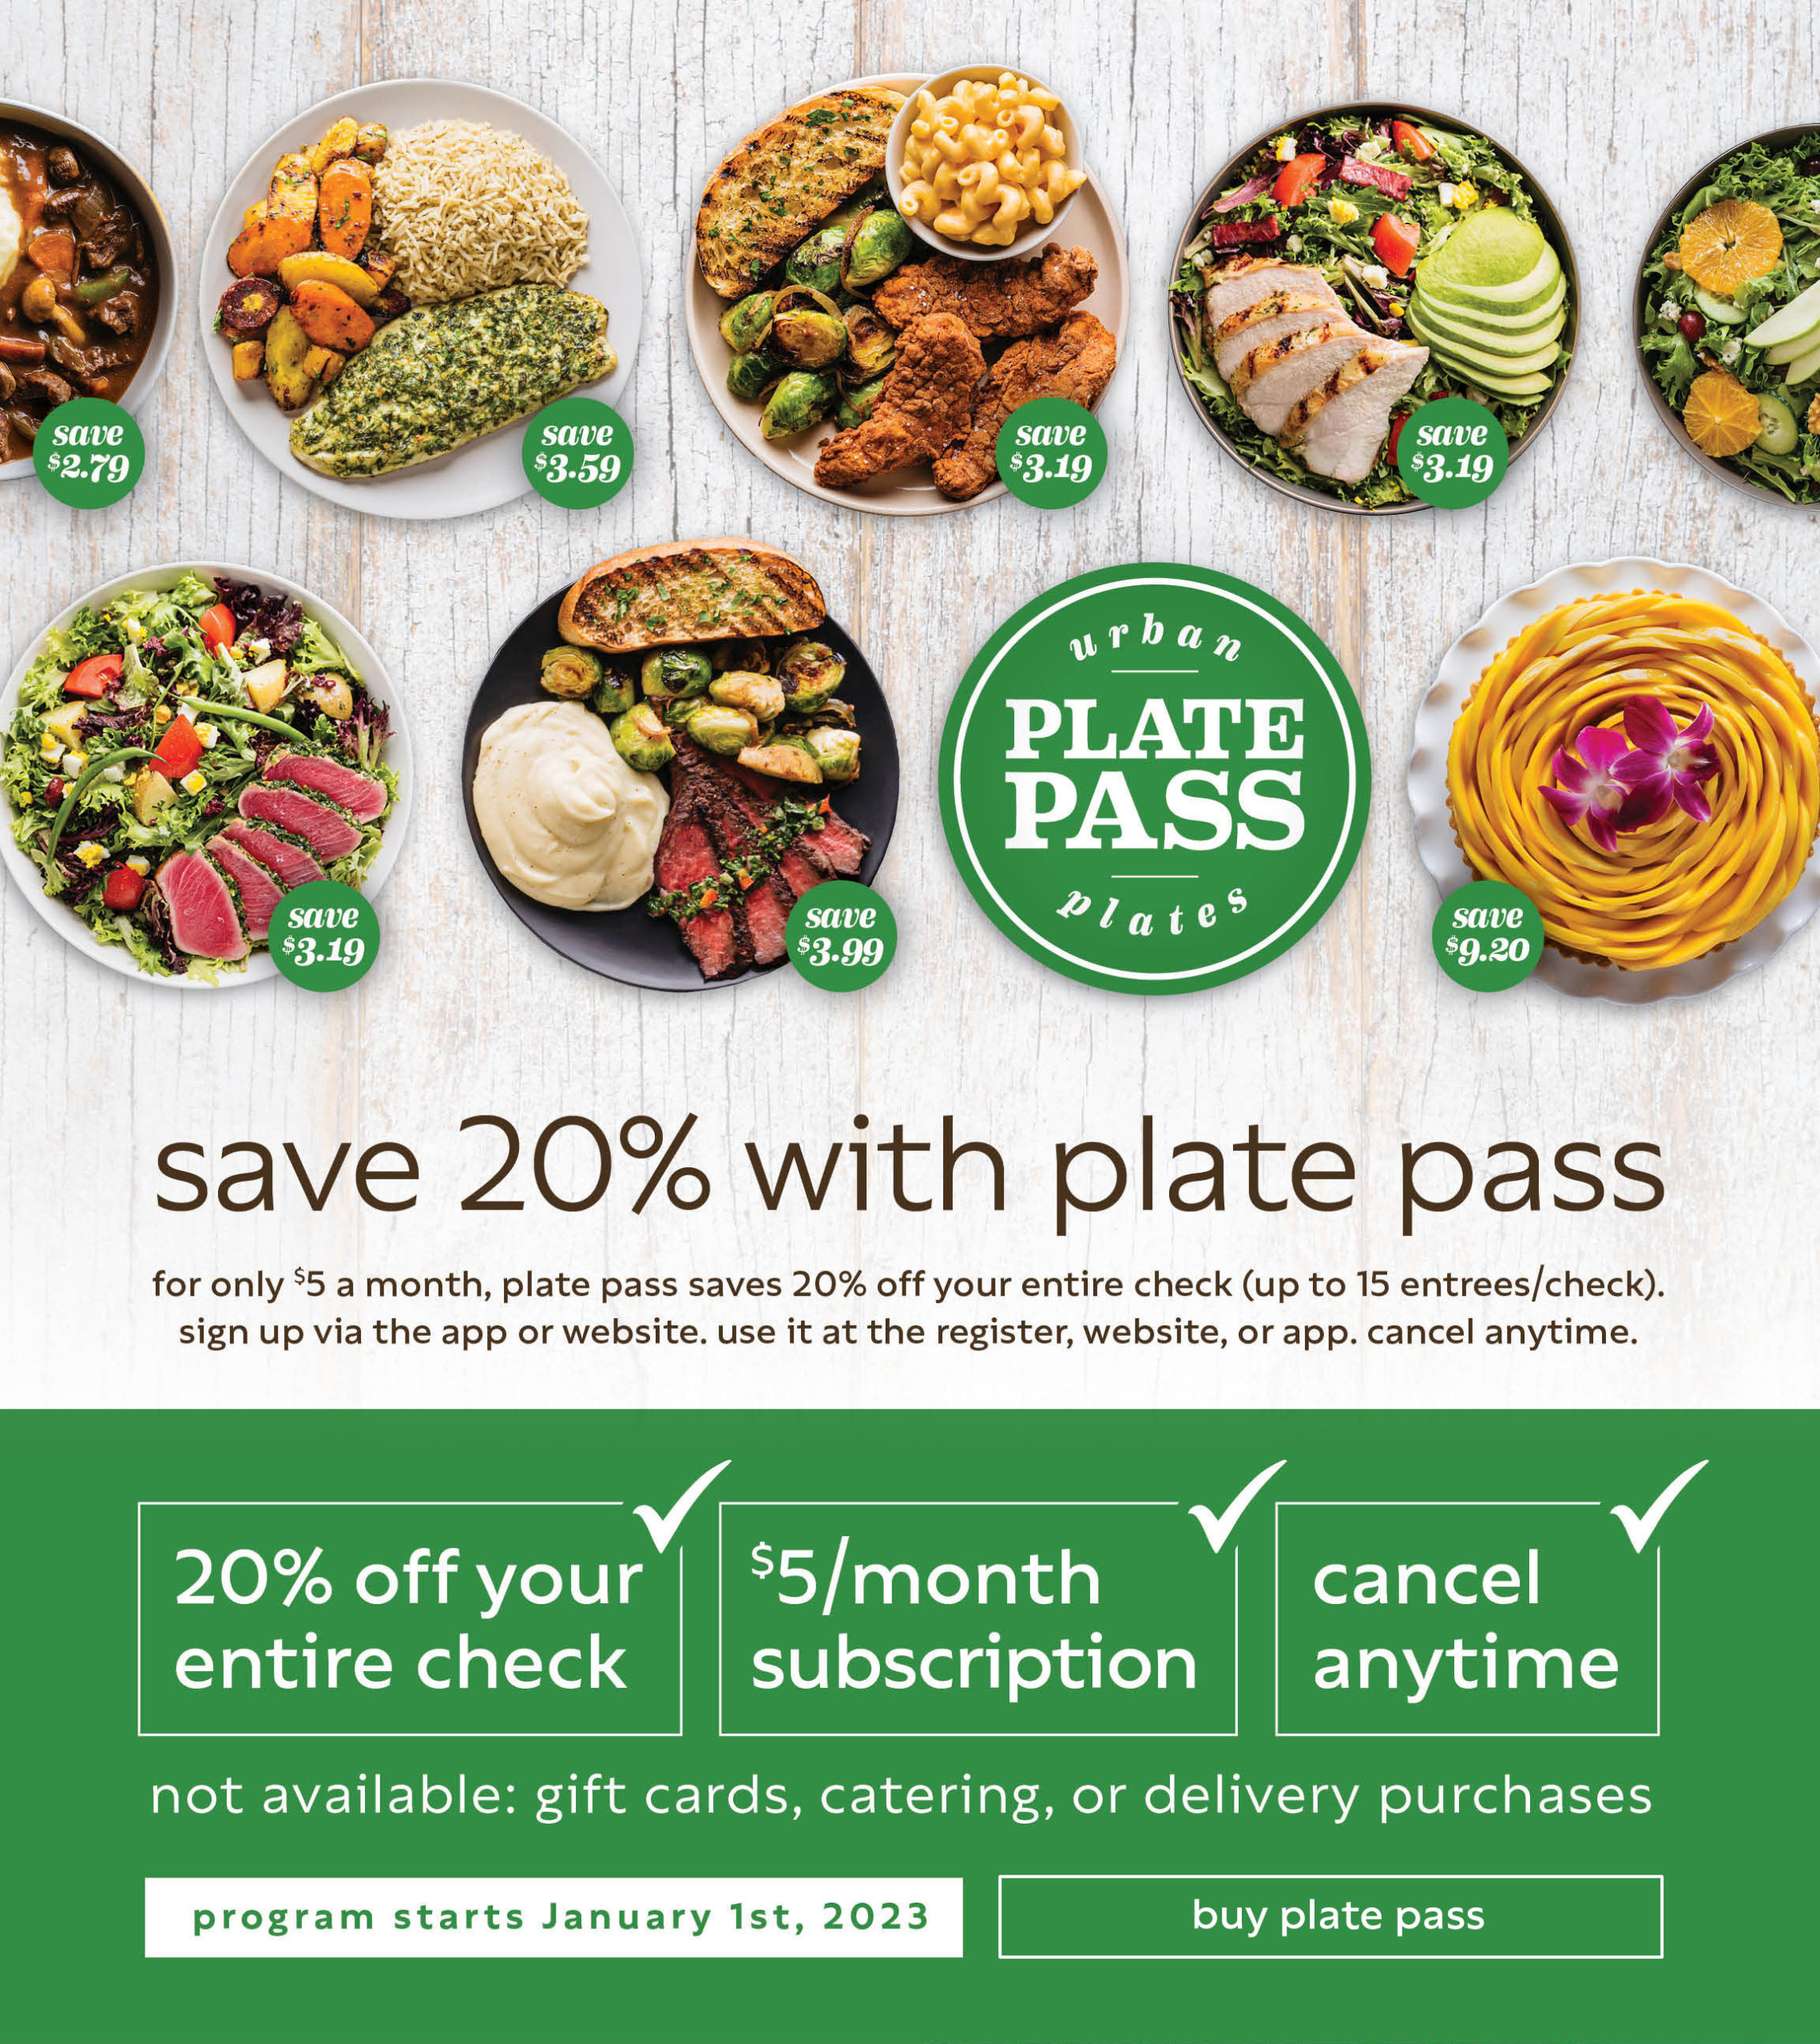 Save 20% with plate pass